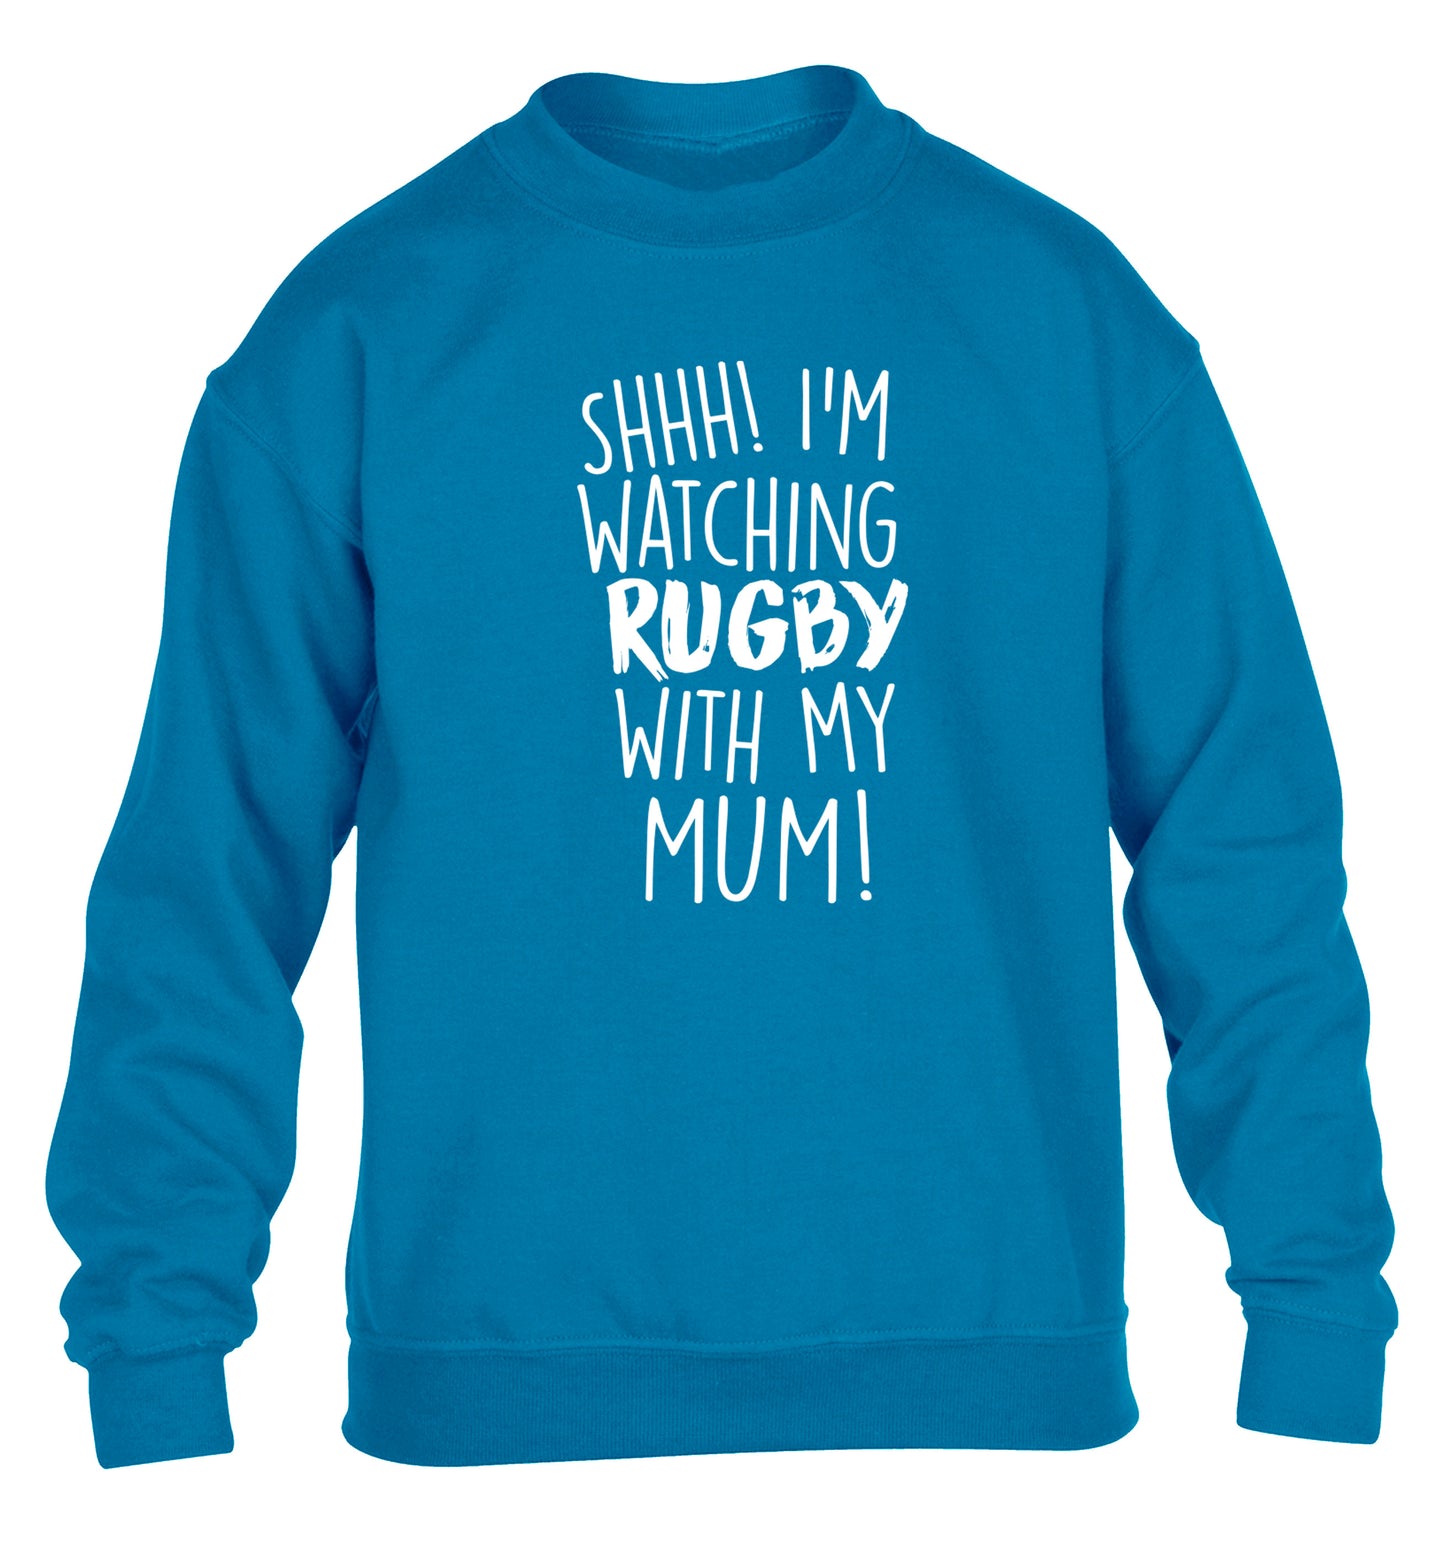 Shh... I'm watching rugby with my mum children's blue sweater 12-13 Years